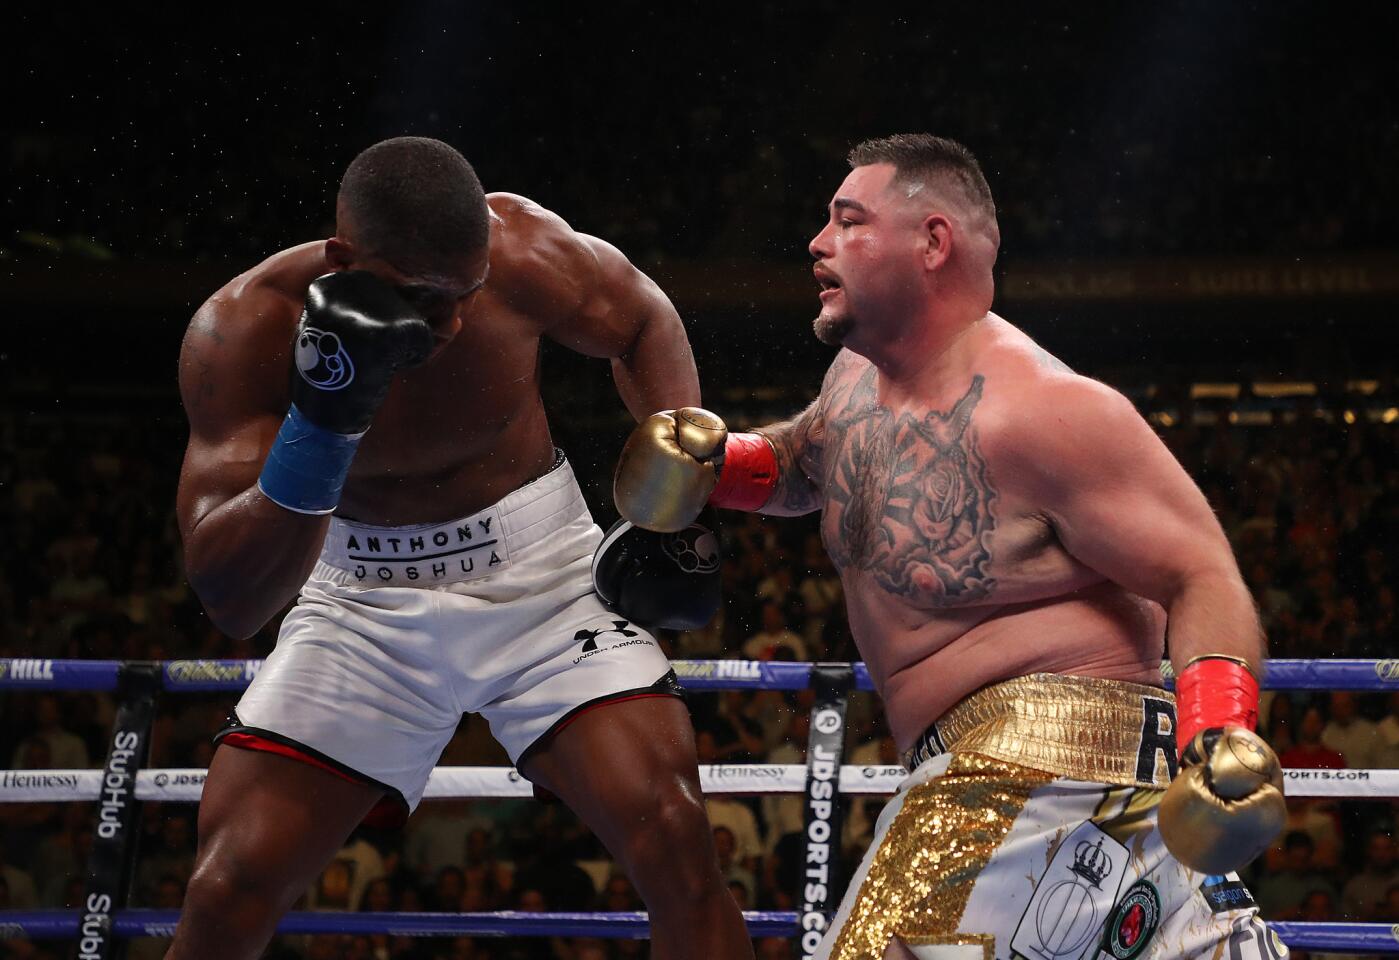 Andy Ruiz Jr punches Anthony Joshua after their IBF/WBA/WBO heavyweight title fight at Madison Square Garden on June 01, 2019 in New York City.